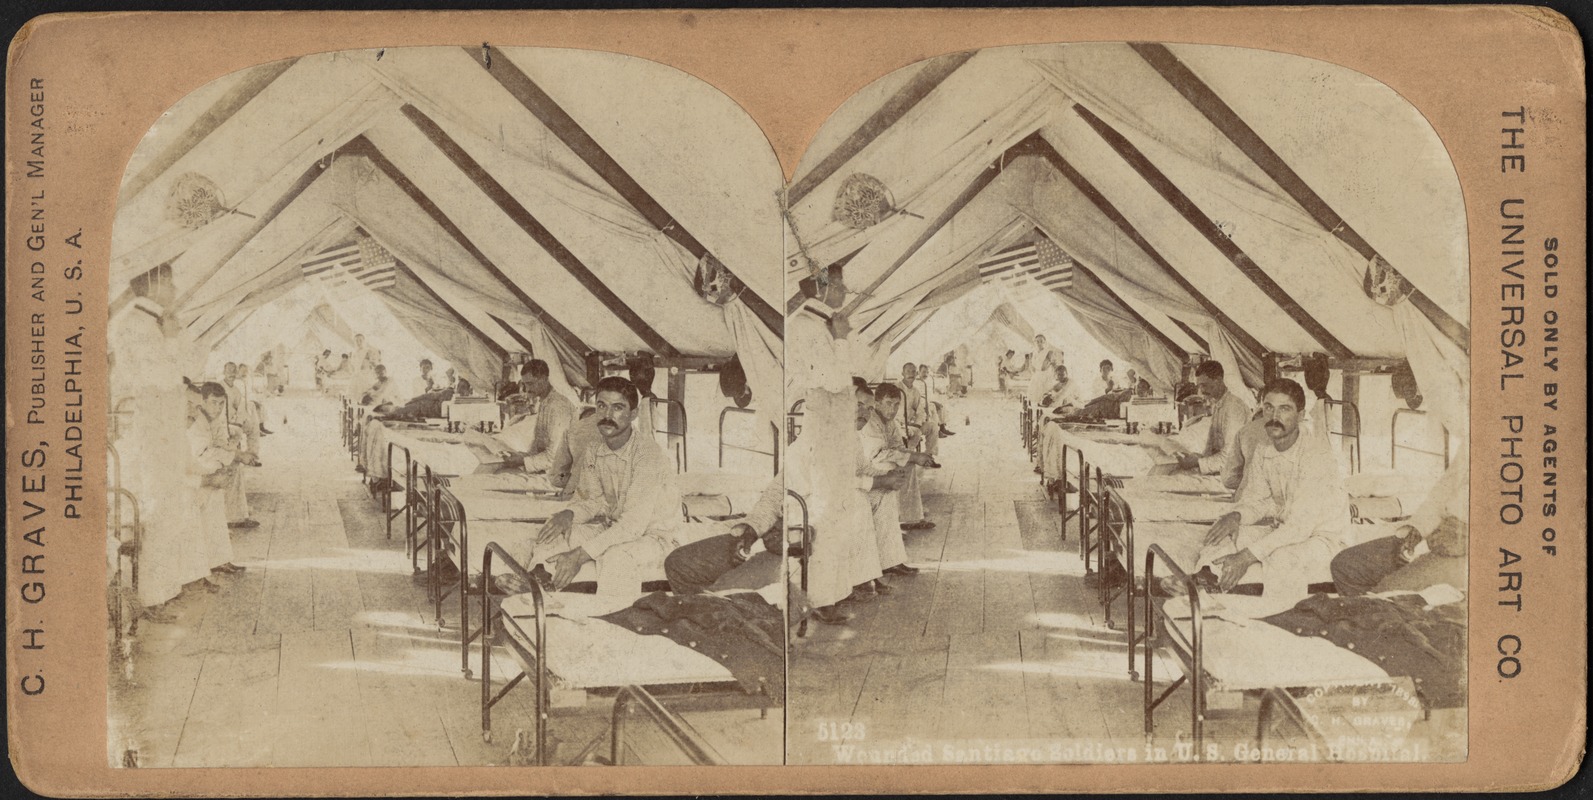 Wounded Santiago soldiers in U.S. general hospital